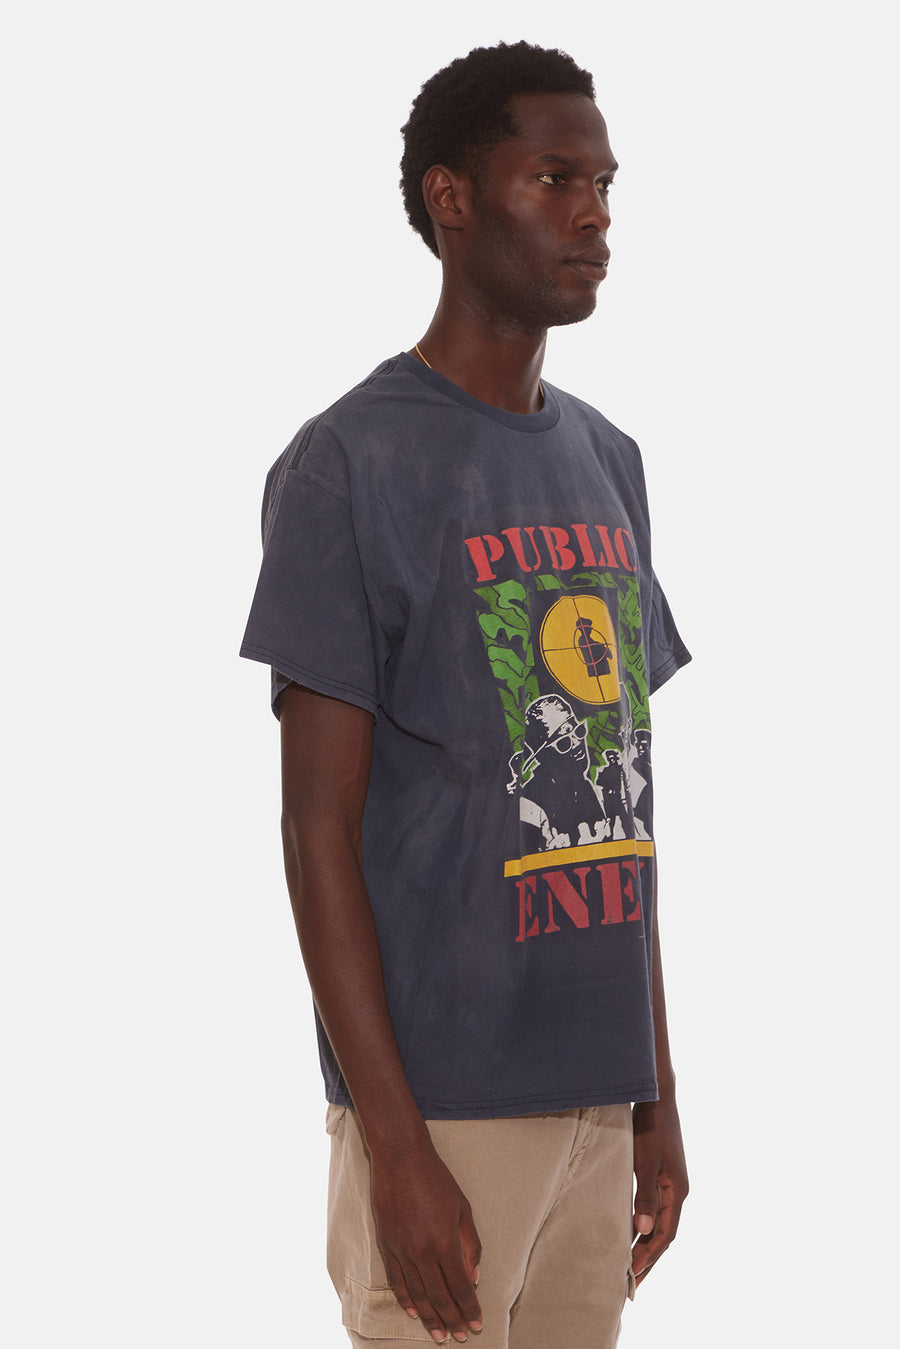 Distressed Public Enemy Vintage Tee Yellow Target Charocoal